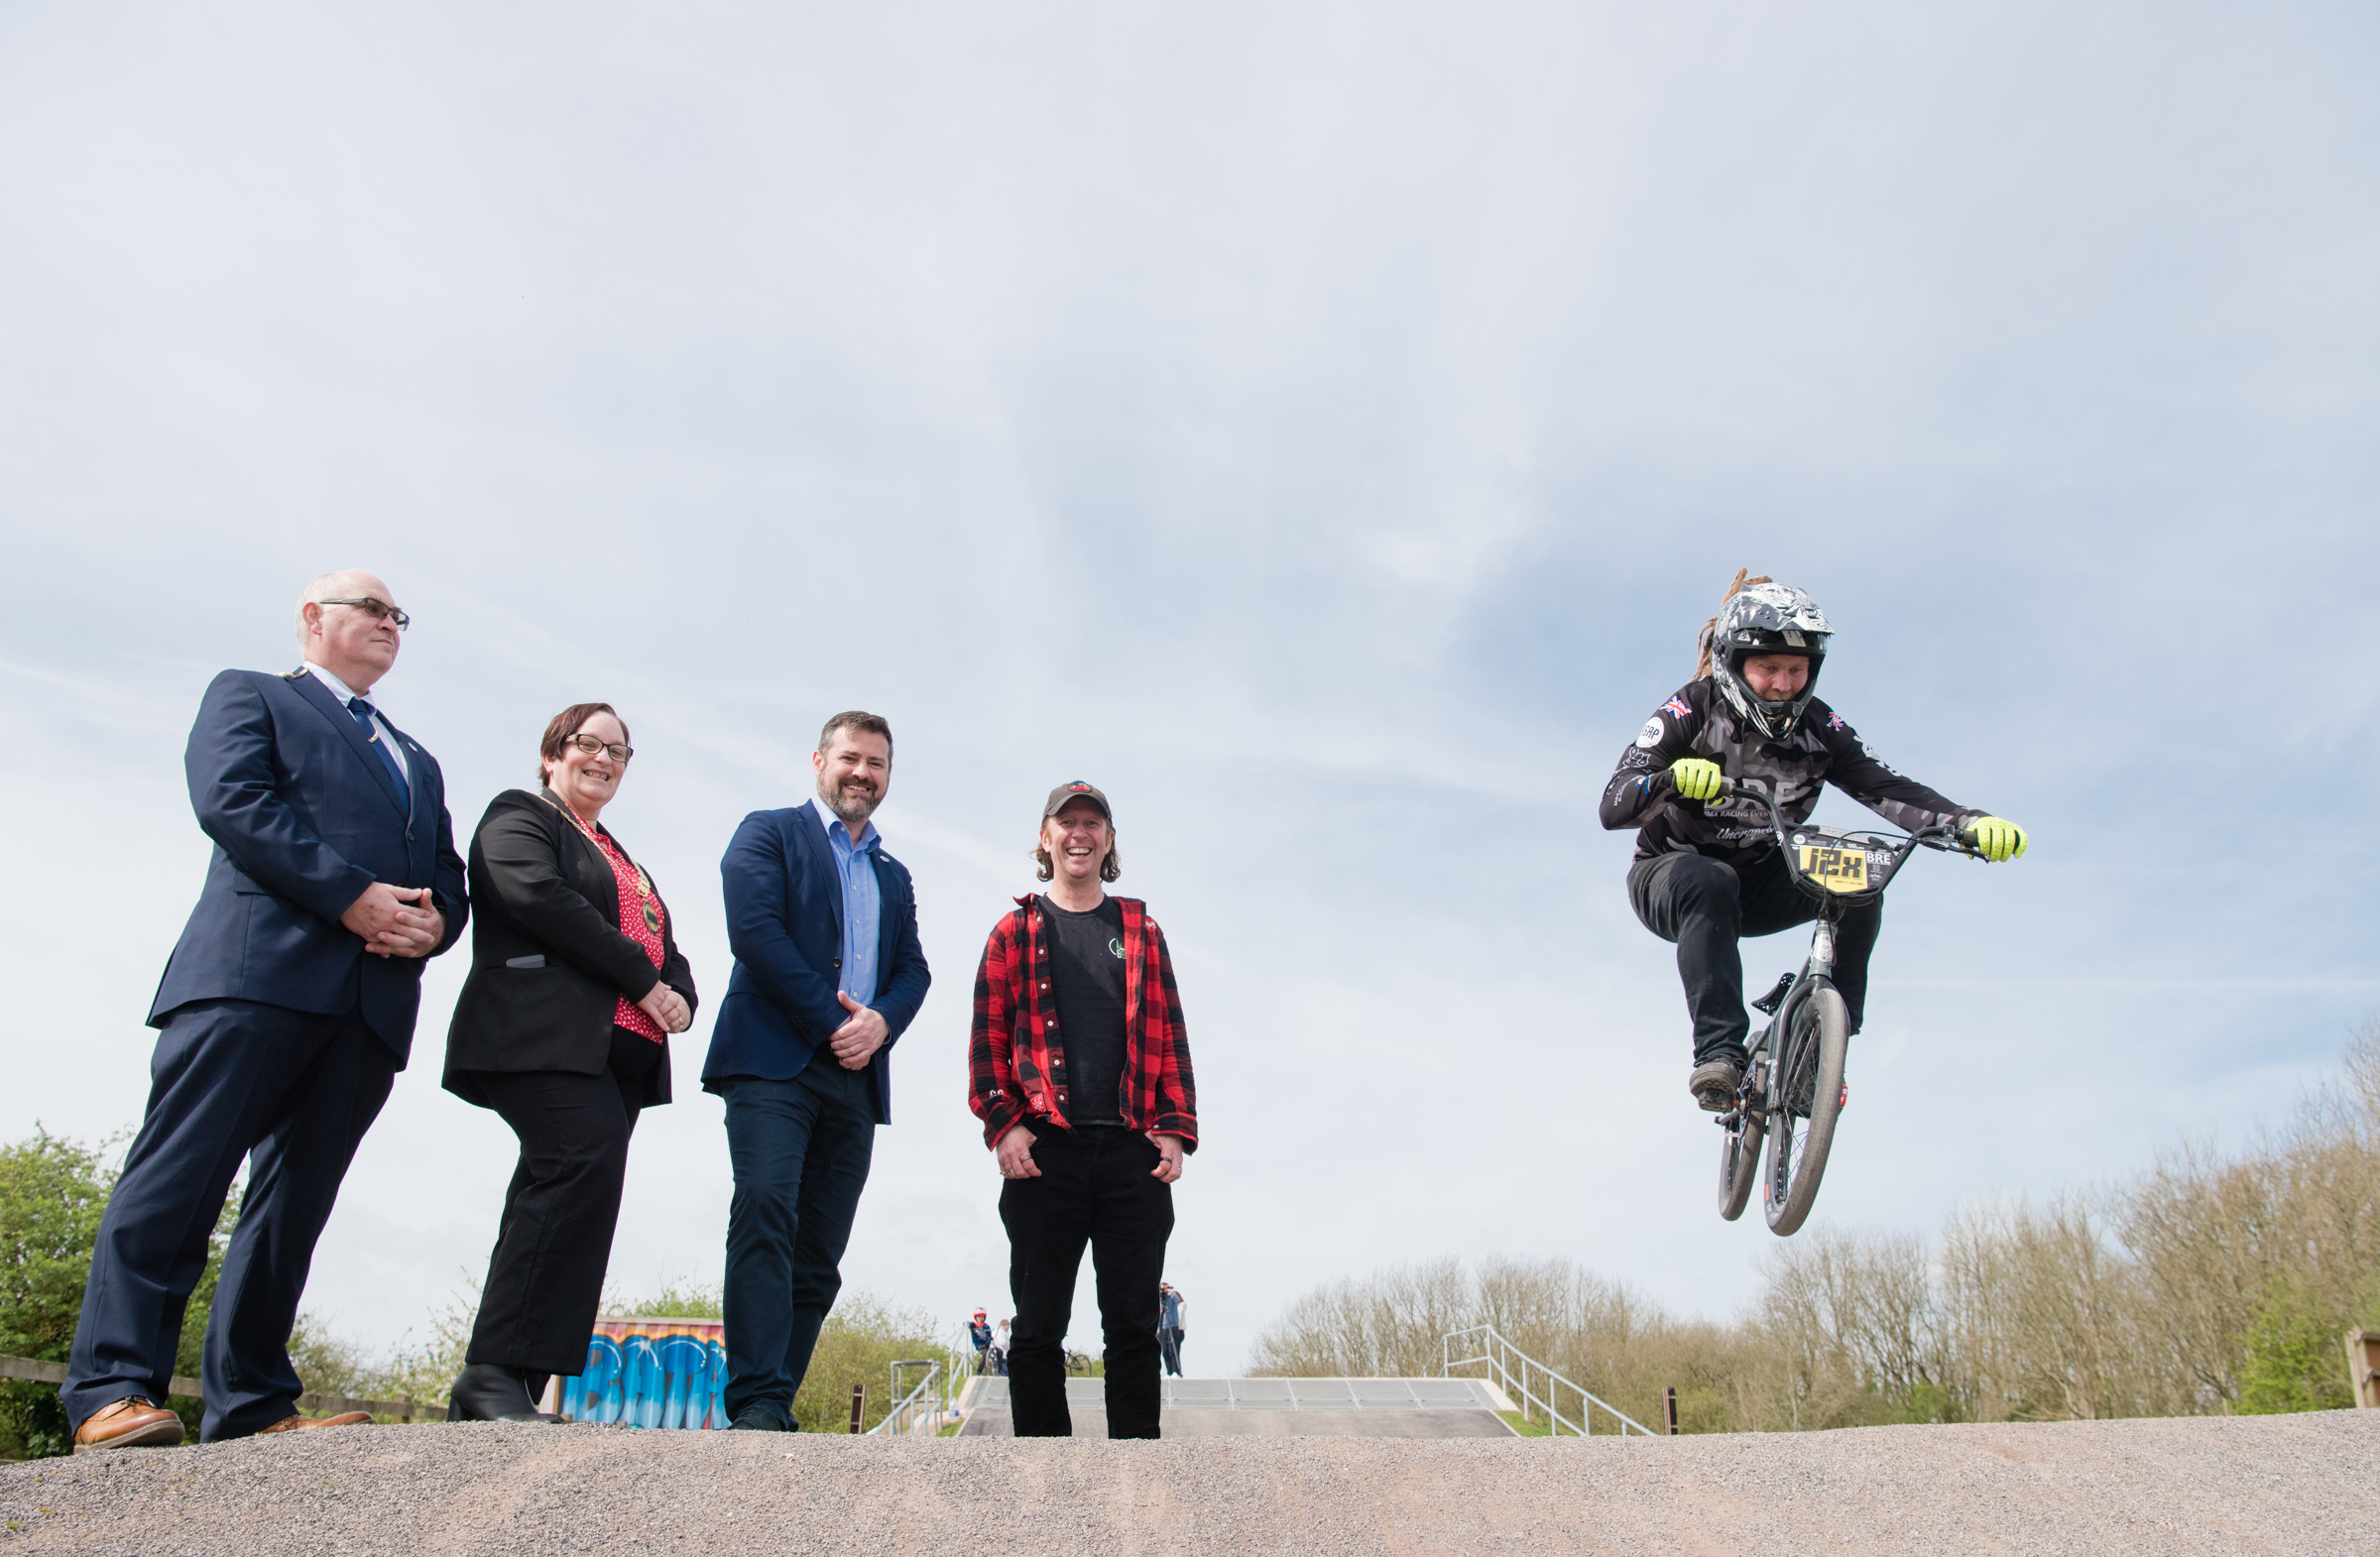 council and Bath BMX club staff stand and watch as BMX rider does a bike stunt off the ground